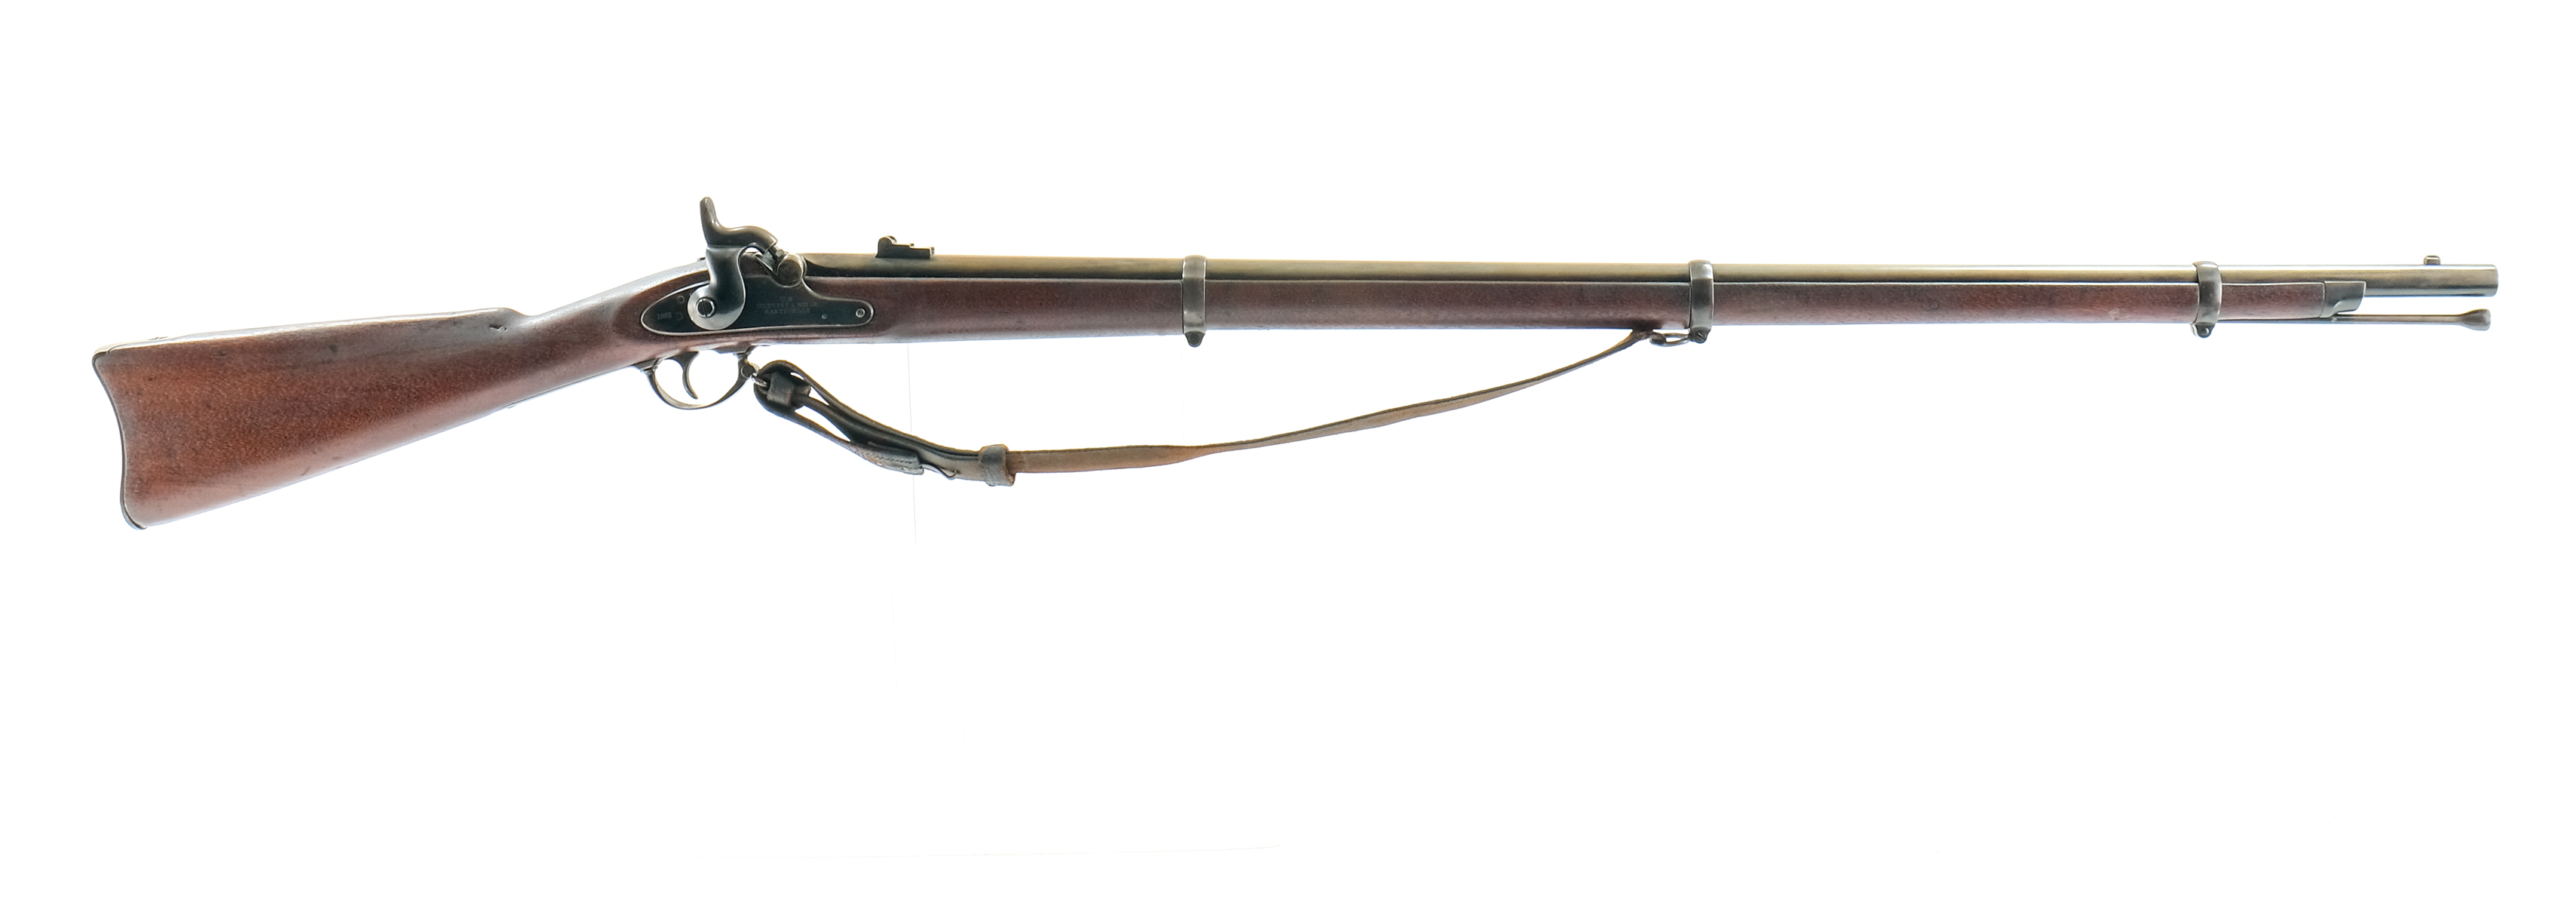 The 1853 Enfield Rifle-Musket Changed Everything - Shooting Times